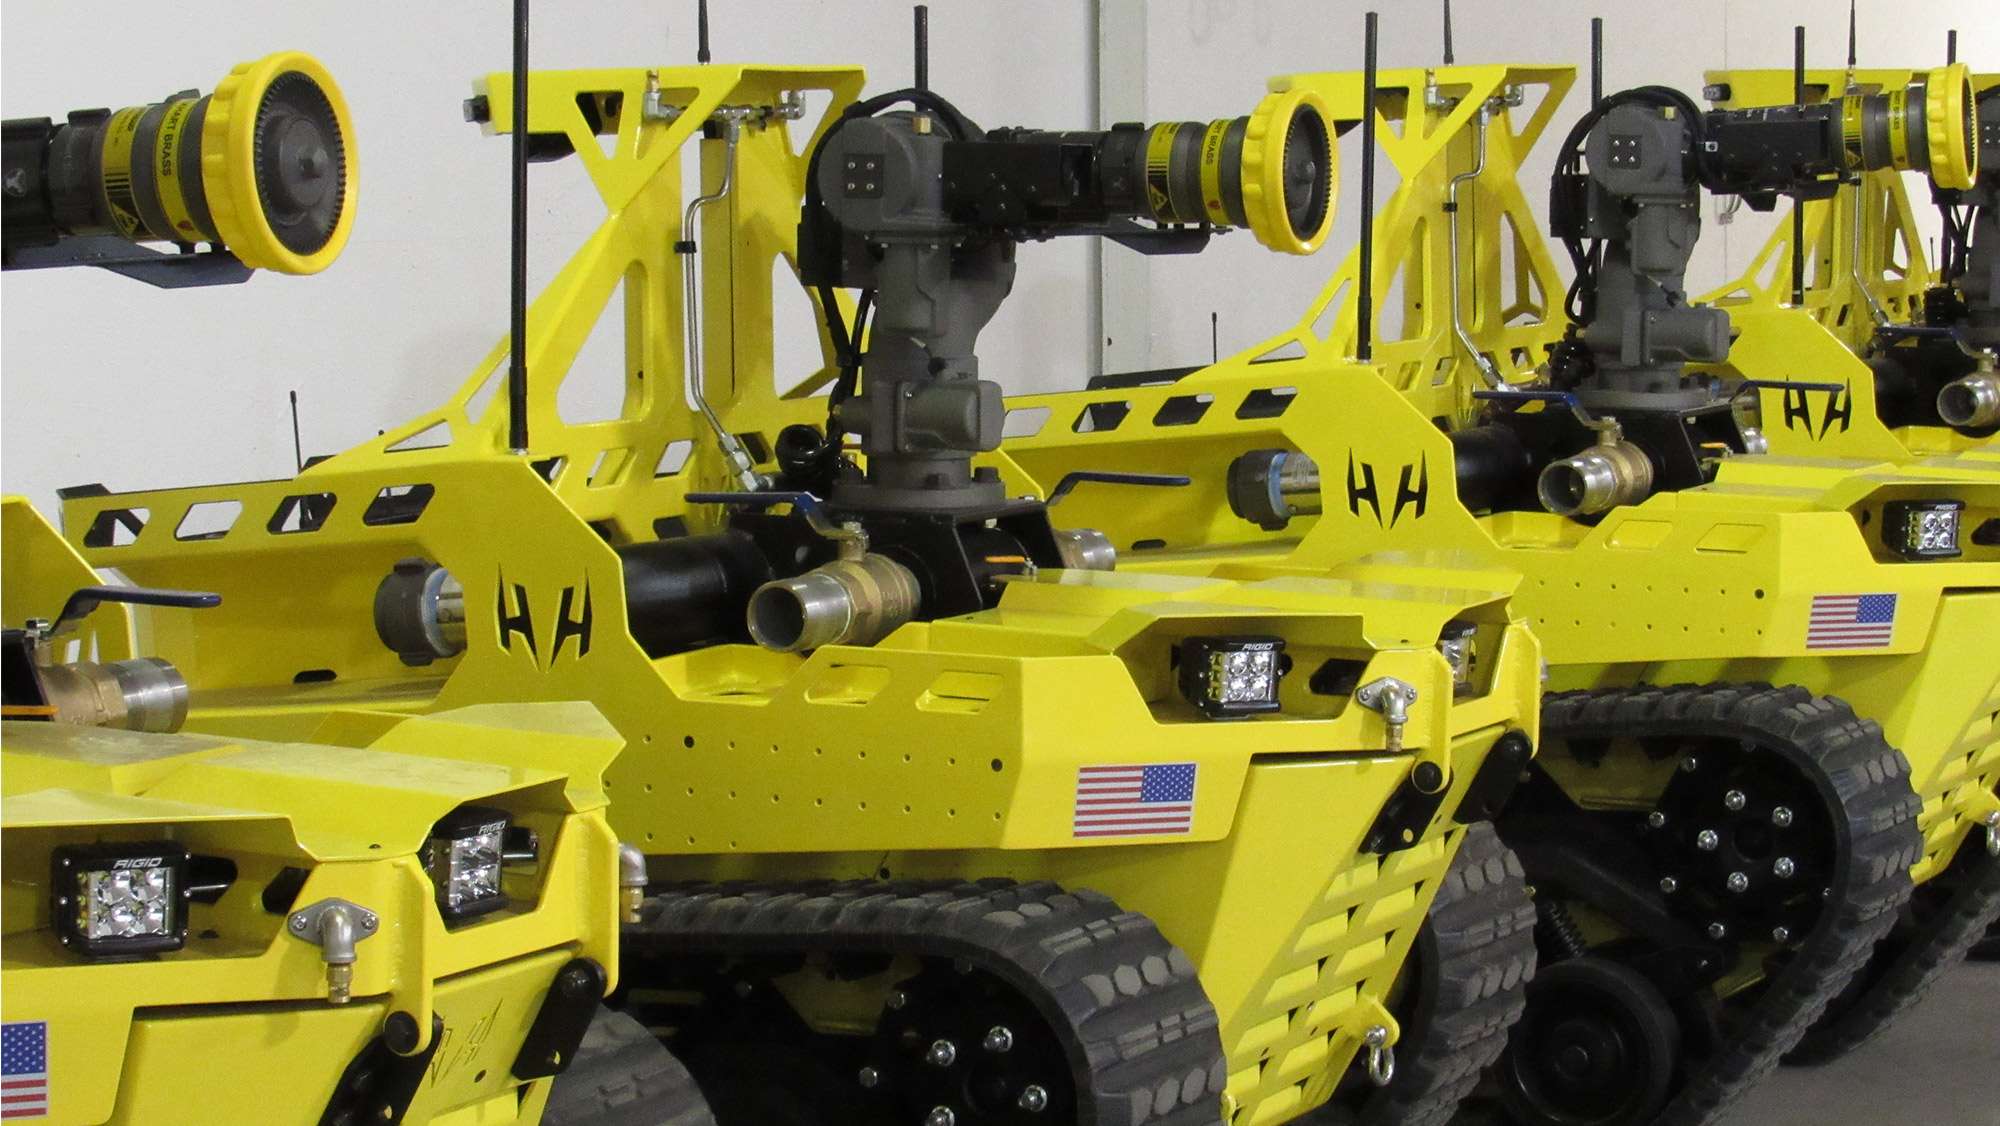 Humanoid firefighting robot will go where it's not safe for humans to  venture   Fox News